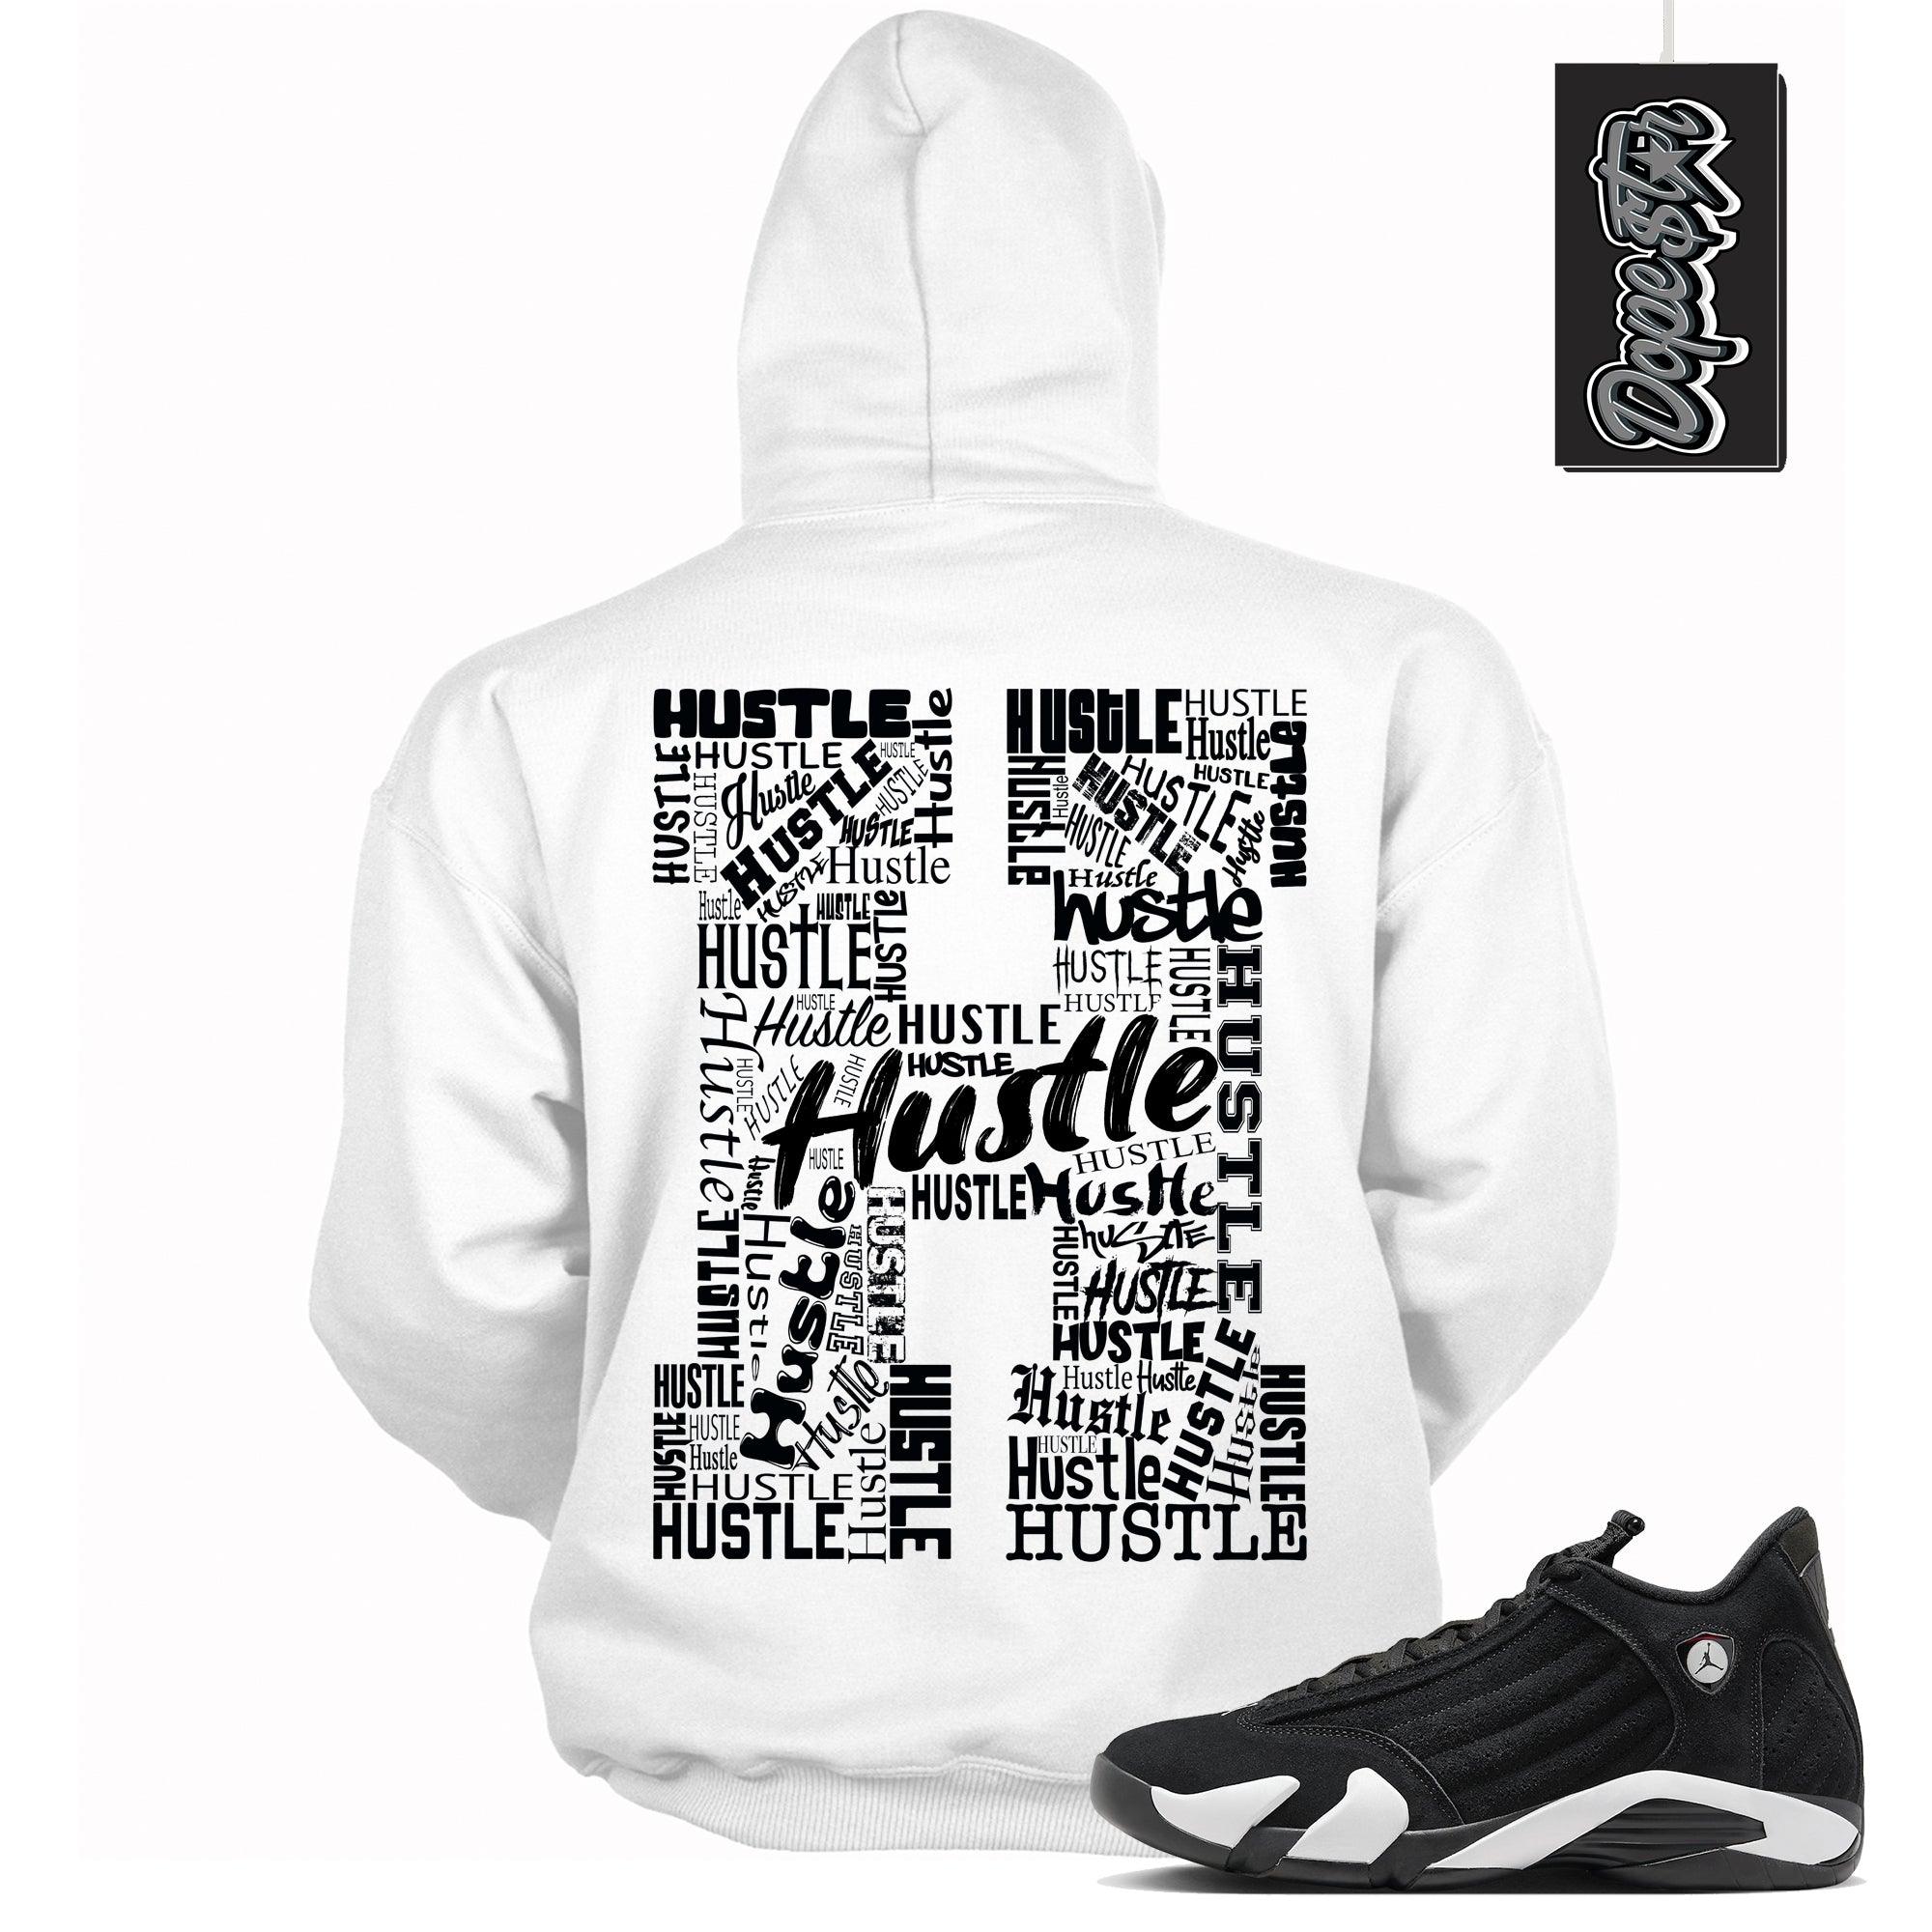 Cool White Graphic Hoodie with “ Hustle H “ print, that perfectly matches Air Jordan 14 Black & White  sneakers